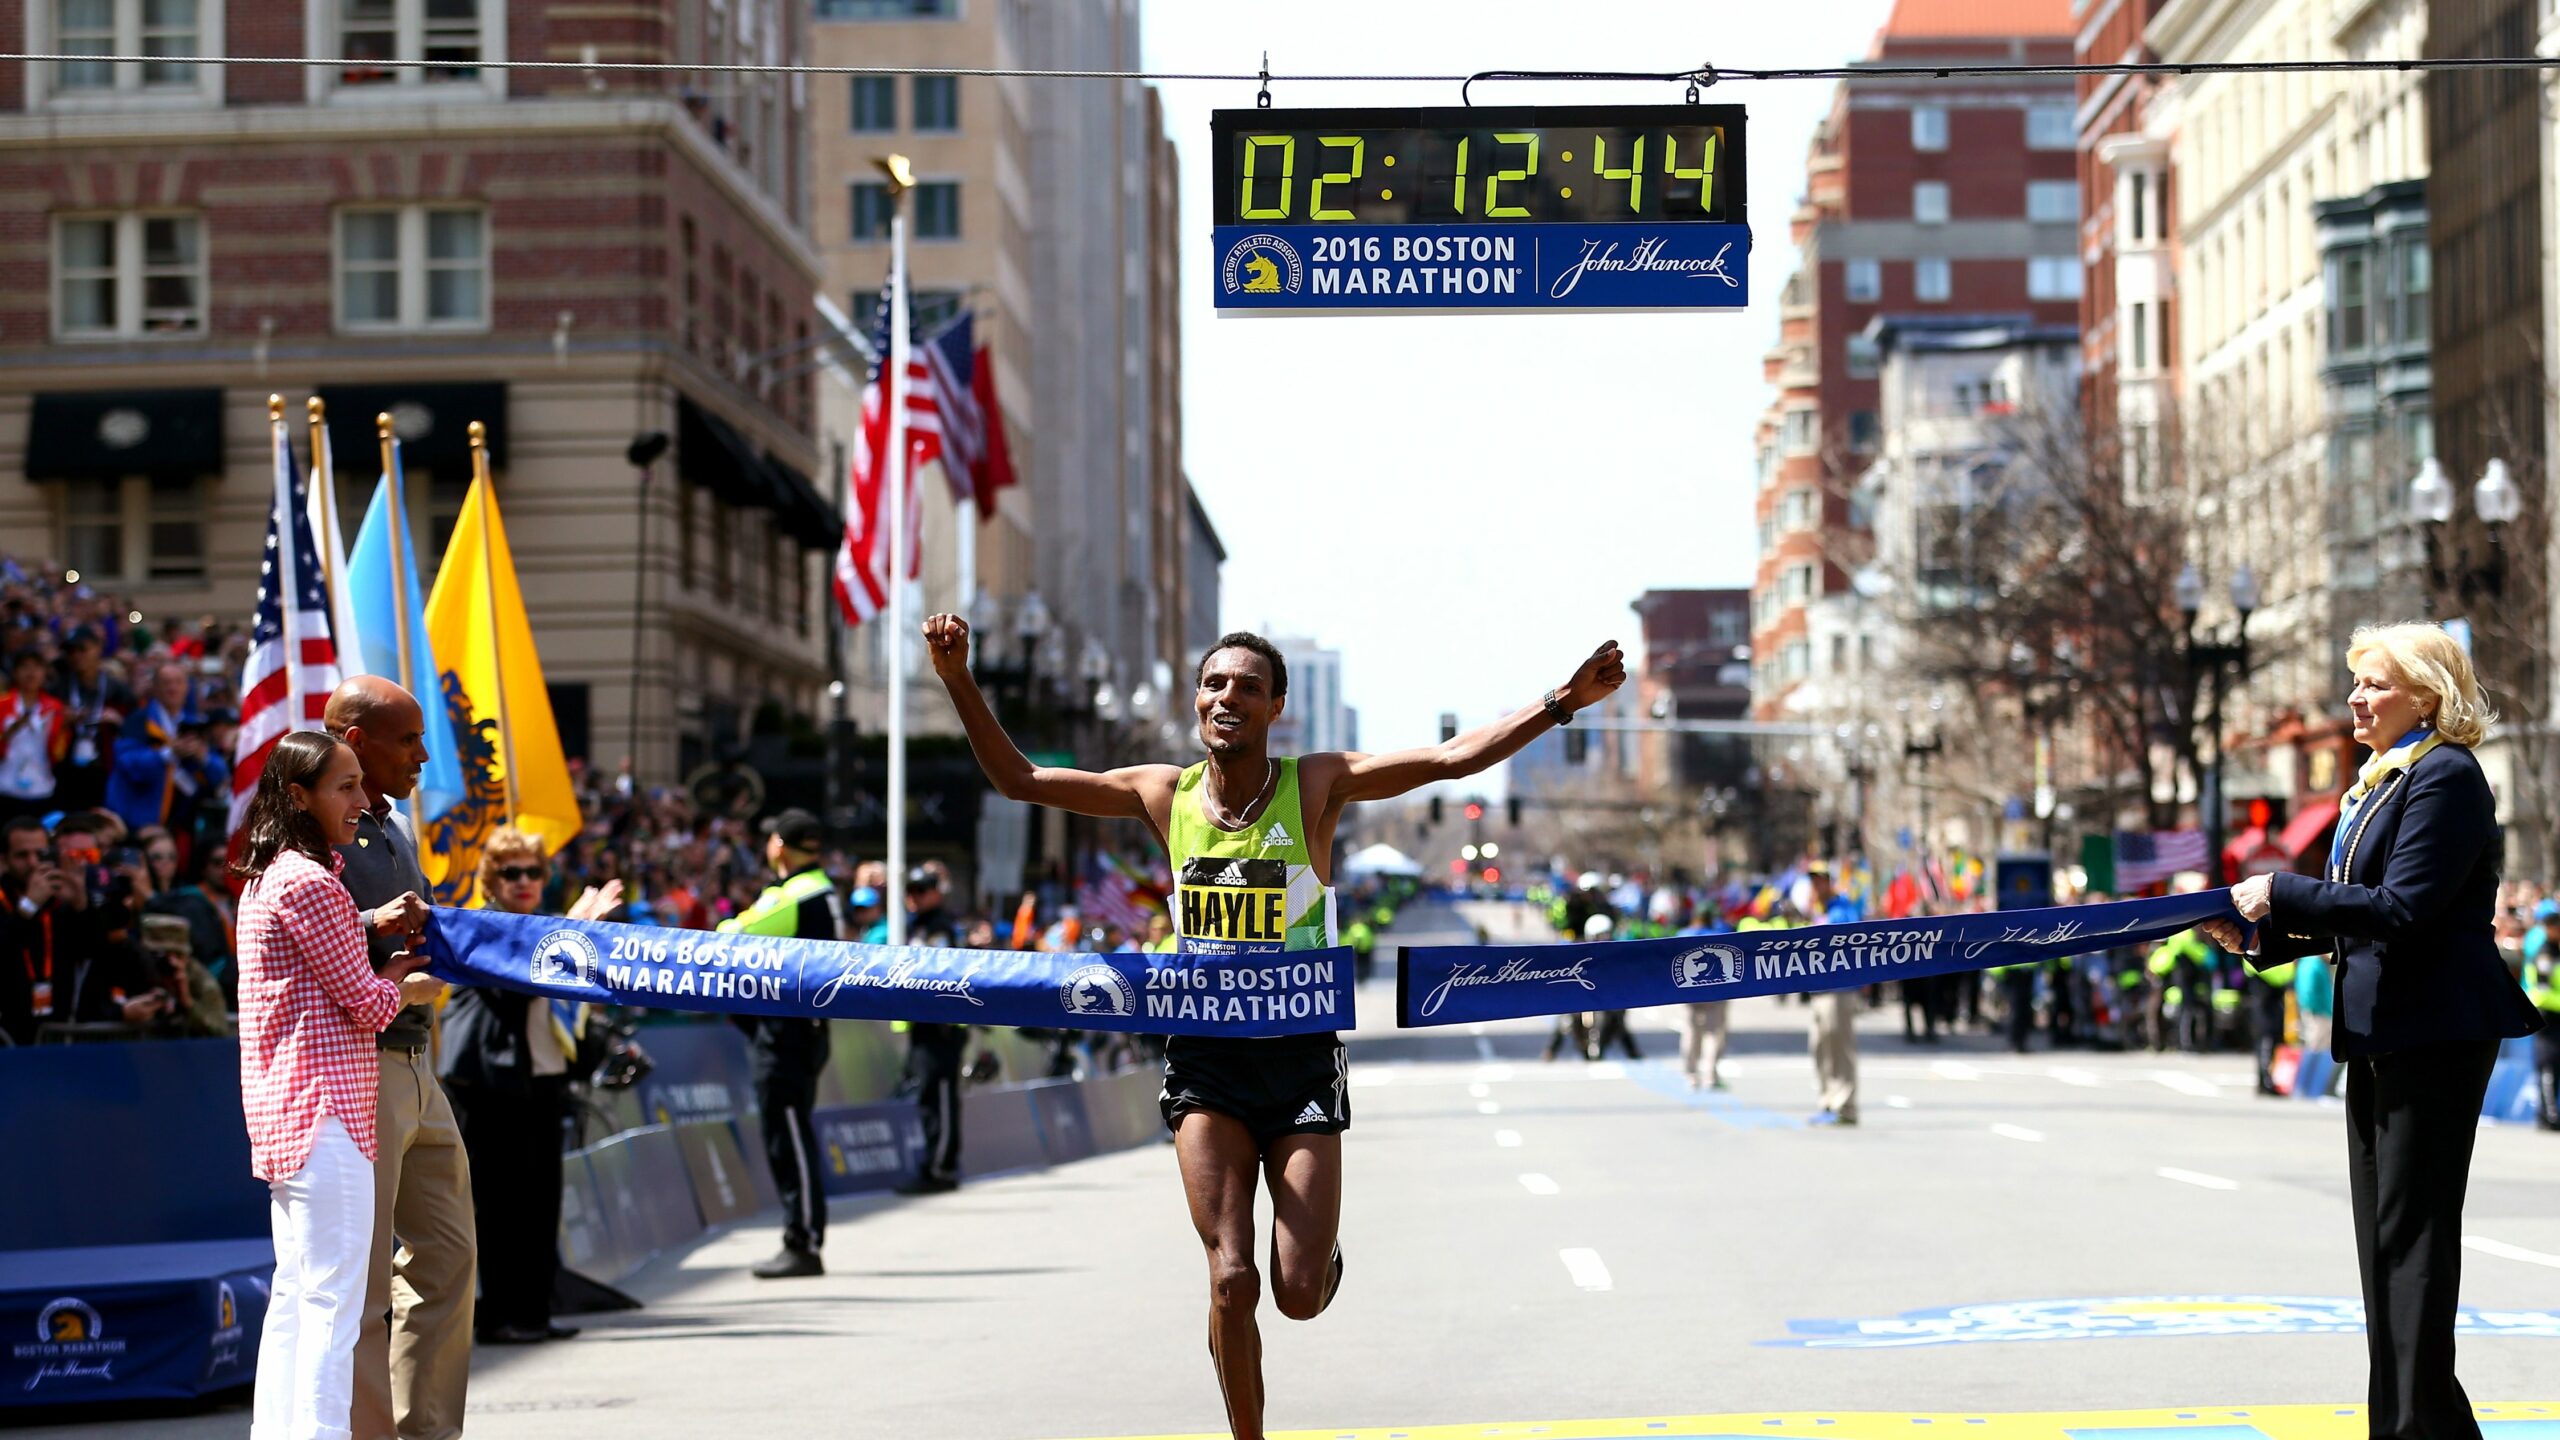 The Ultimate Boston Marathon Viewing Guide: How To Watch And Enjoy The Race